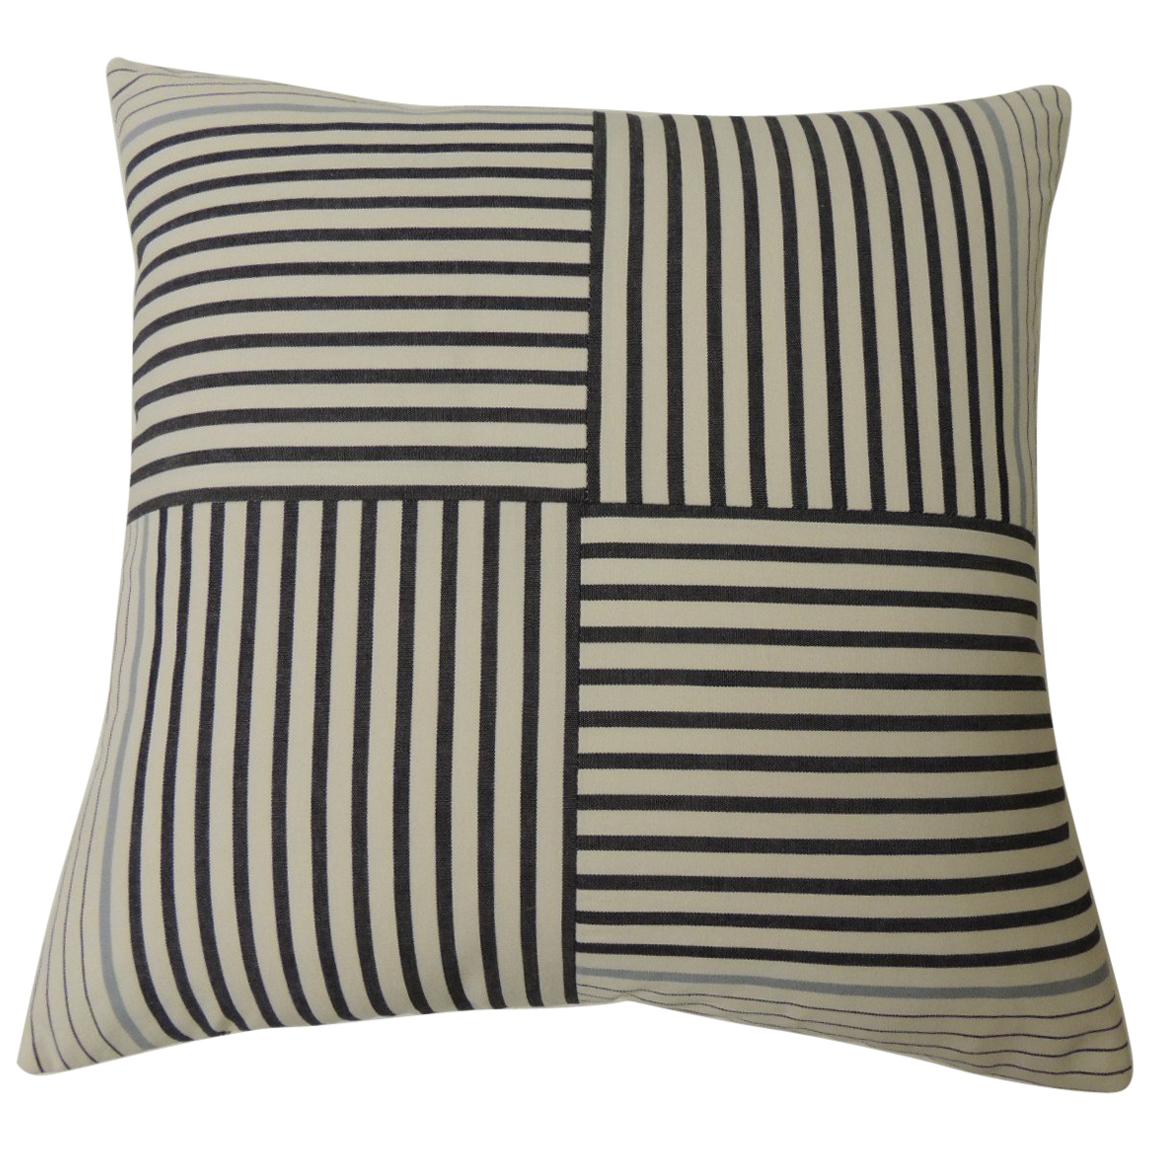 Graphic Natural and Charcoal “Parsons” Stripes Decorative Pillow Double-Sided